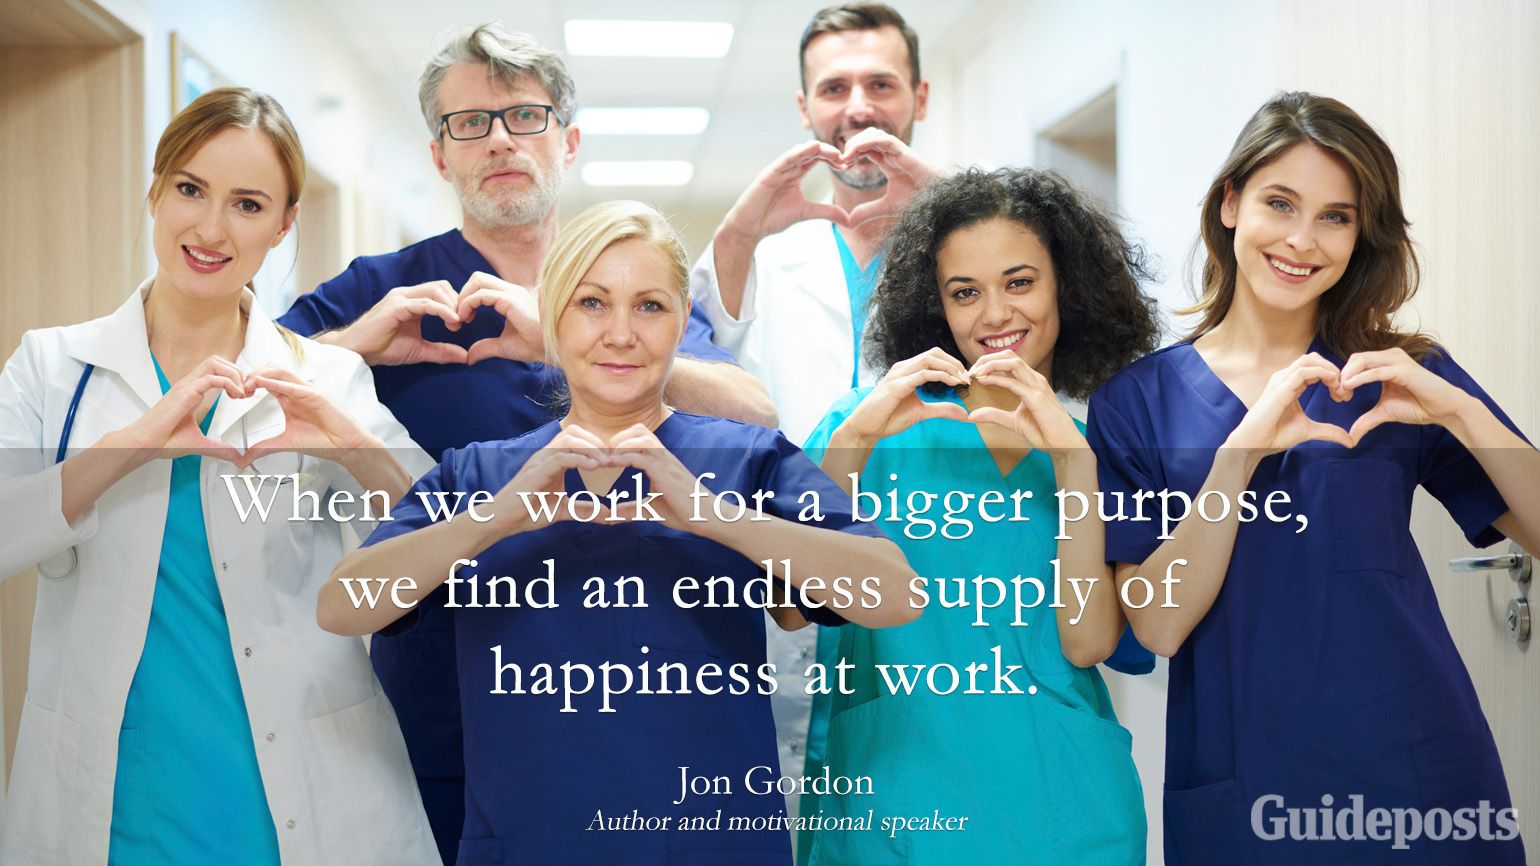 Inspiring Labor Day Quotes: When we work for a bigger purpose, we find an endless supply of happiness at work. Jon Gordon better living life advices